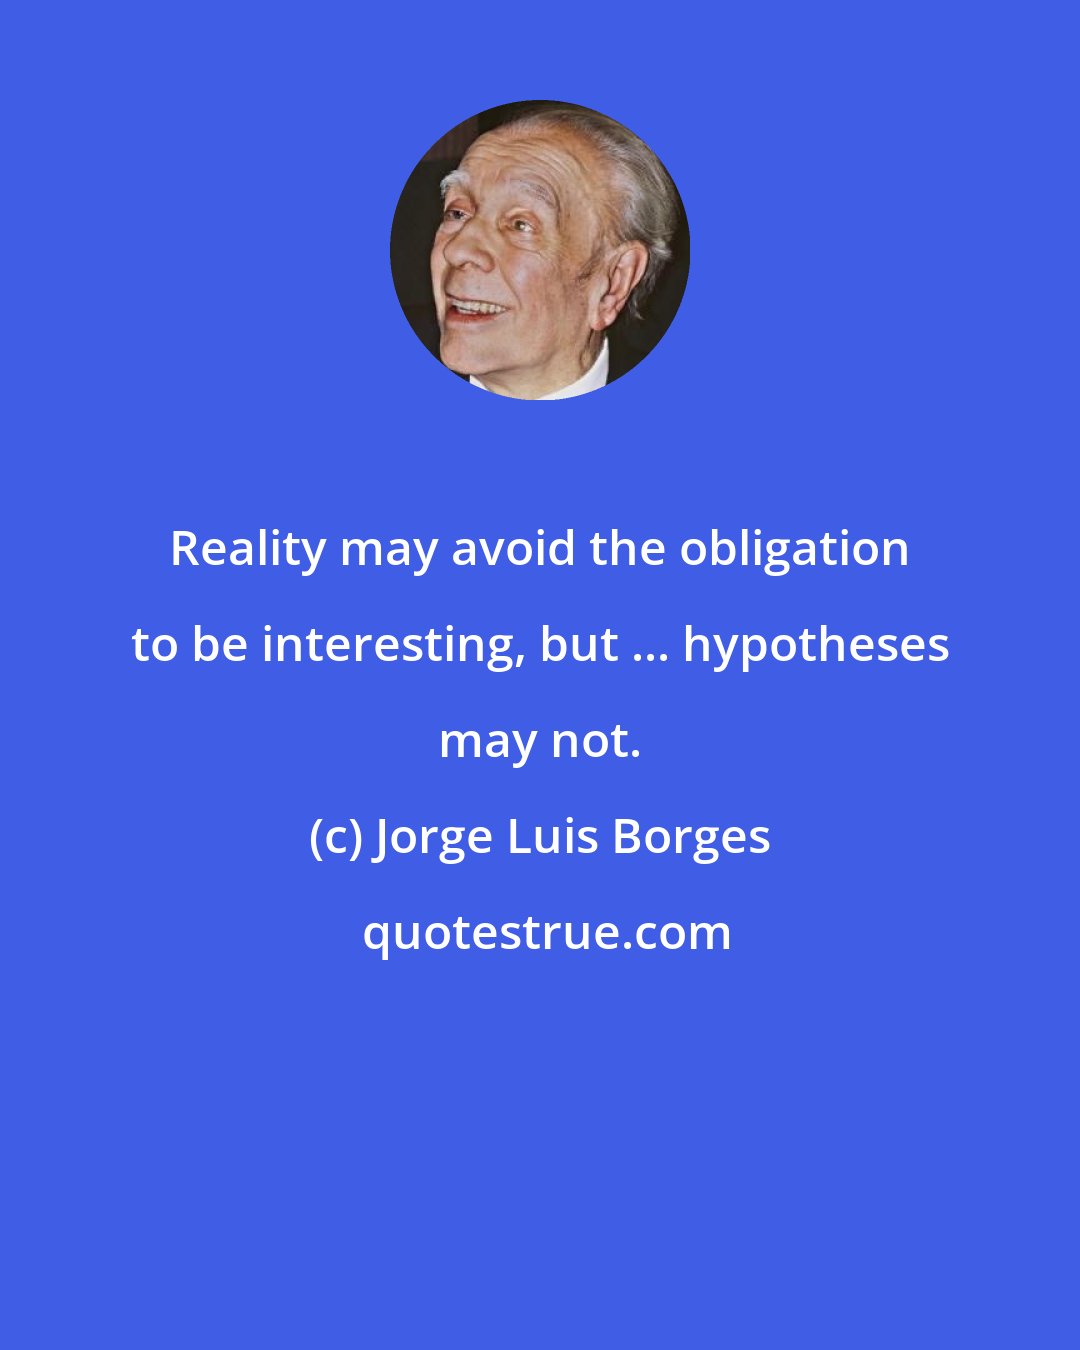 Jorge Luis Borges: Reality may avoid the obligation to be interesting, but ... hypotheses may not.